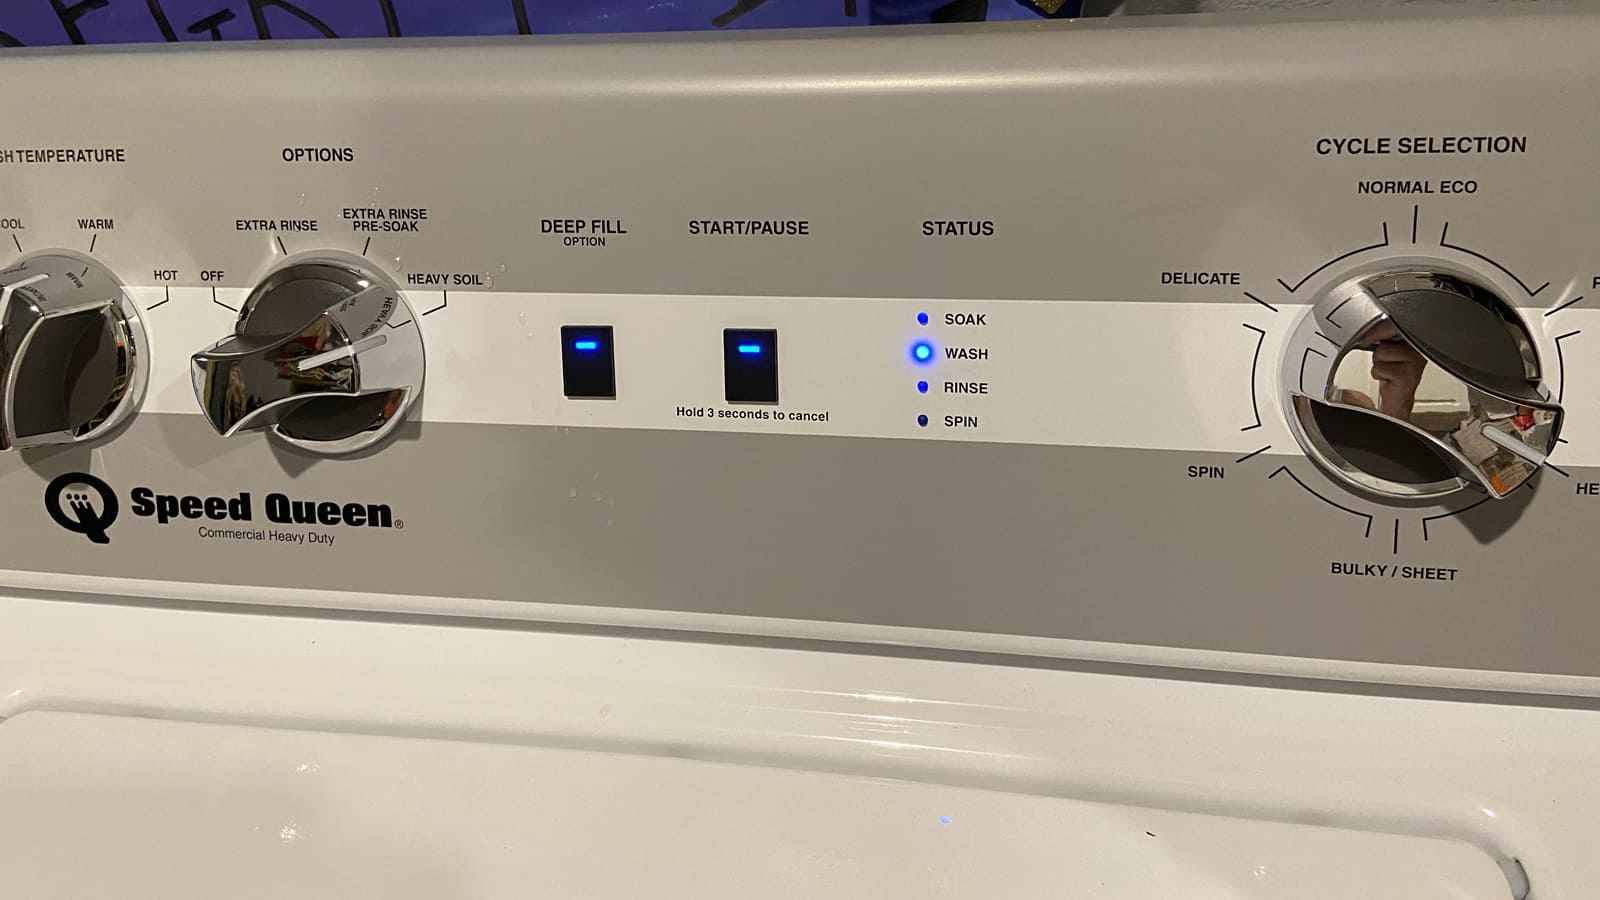 The Lights Wash And Rinse Are Flashing On The Speed Queen Washer